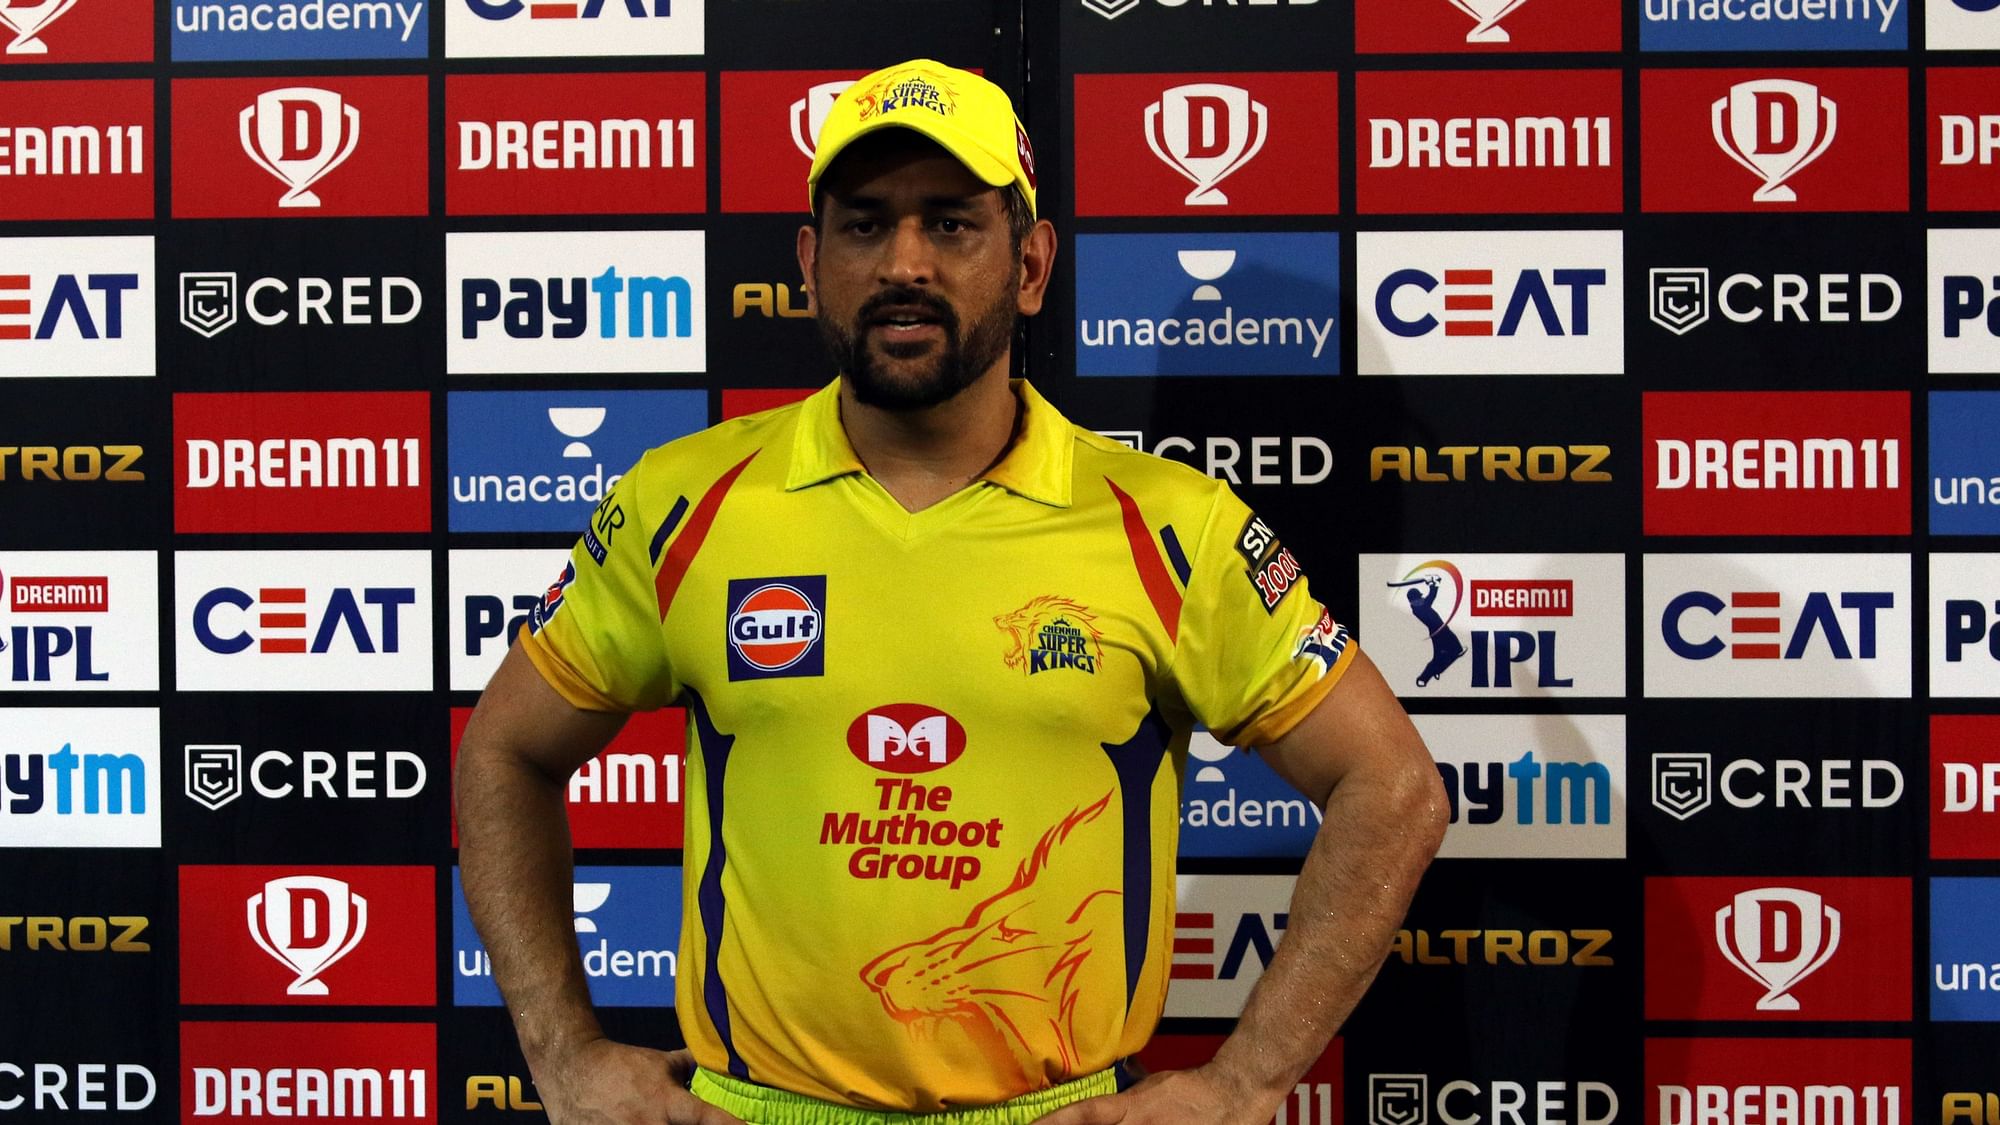 MS Dhoni admitted that CSK’s batsmen let their bowlers down in their 10-run loss to KKR.